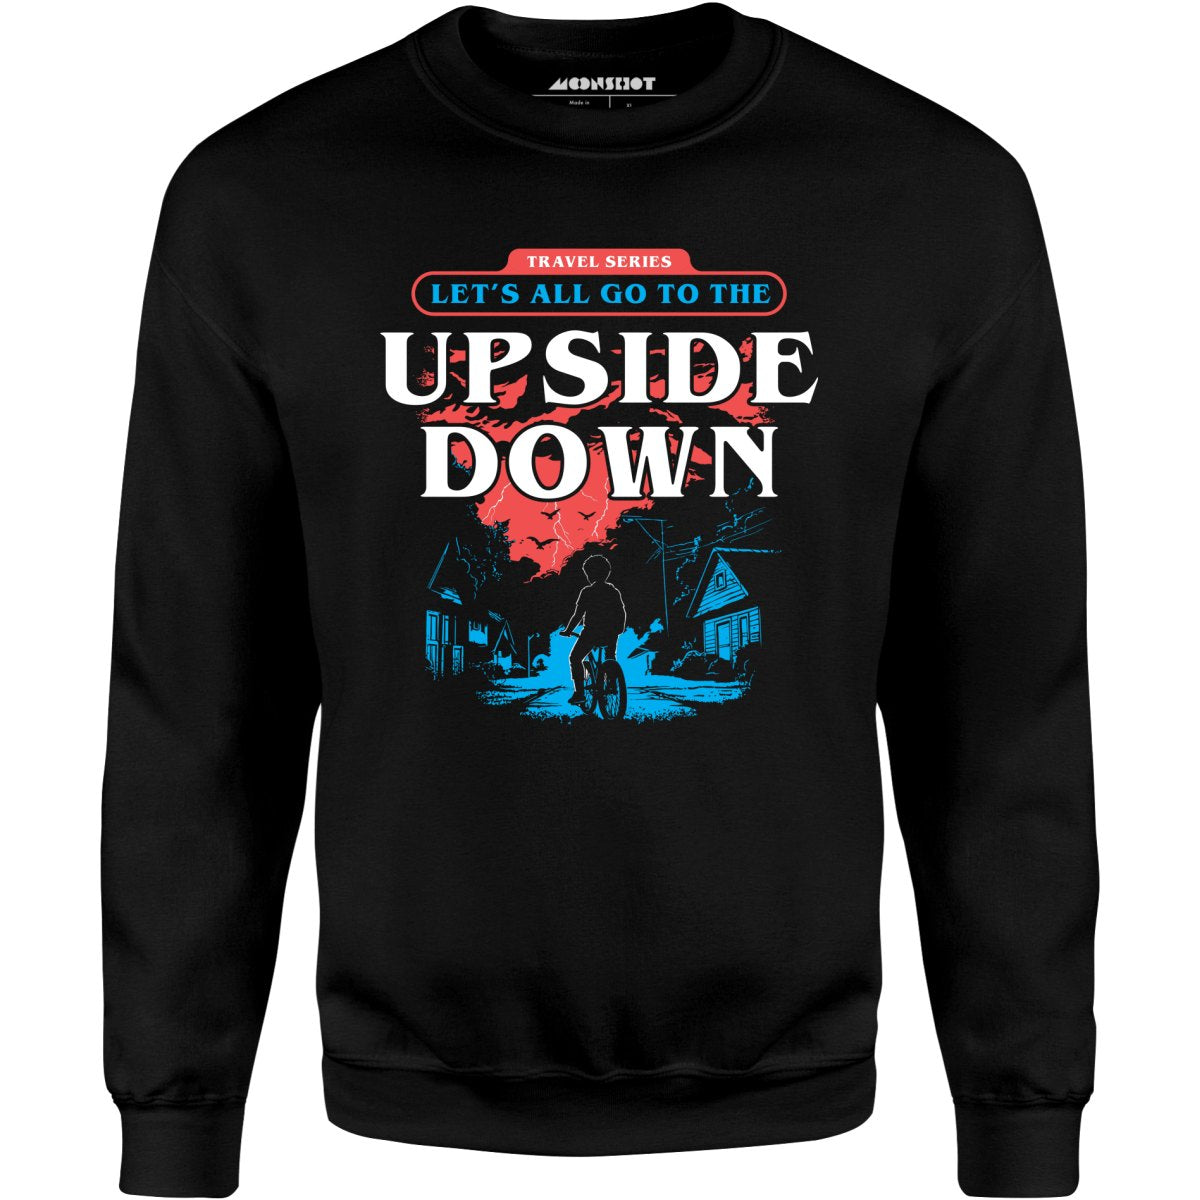 Let's All Go To The Upside Down - Unisex Sweatshirt